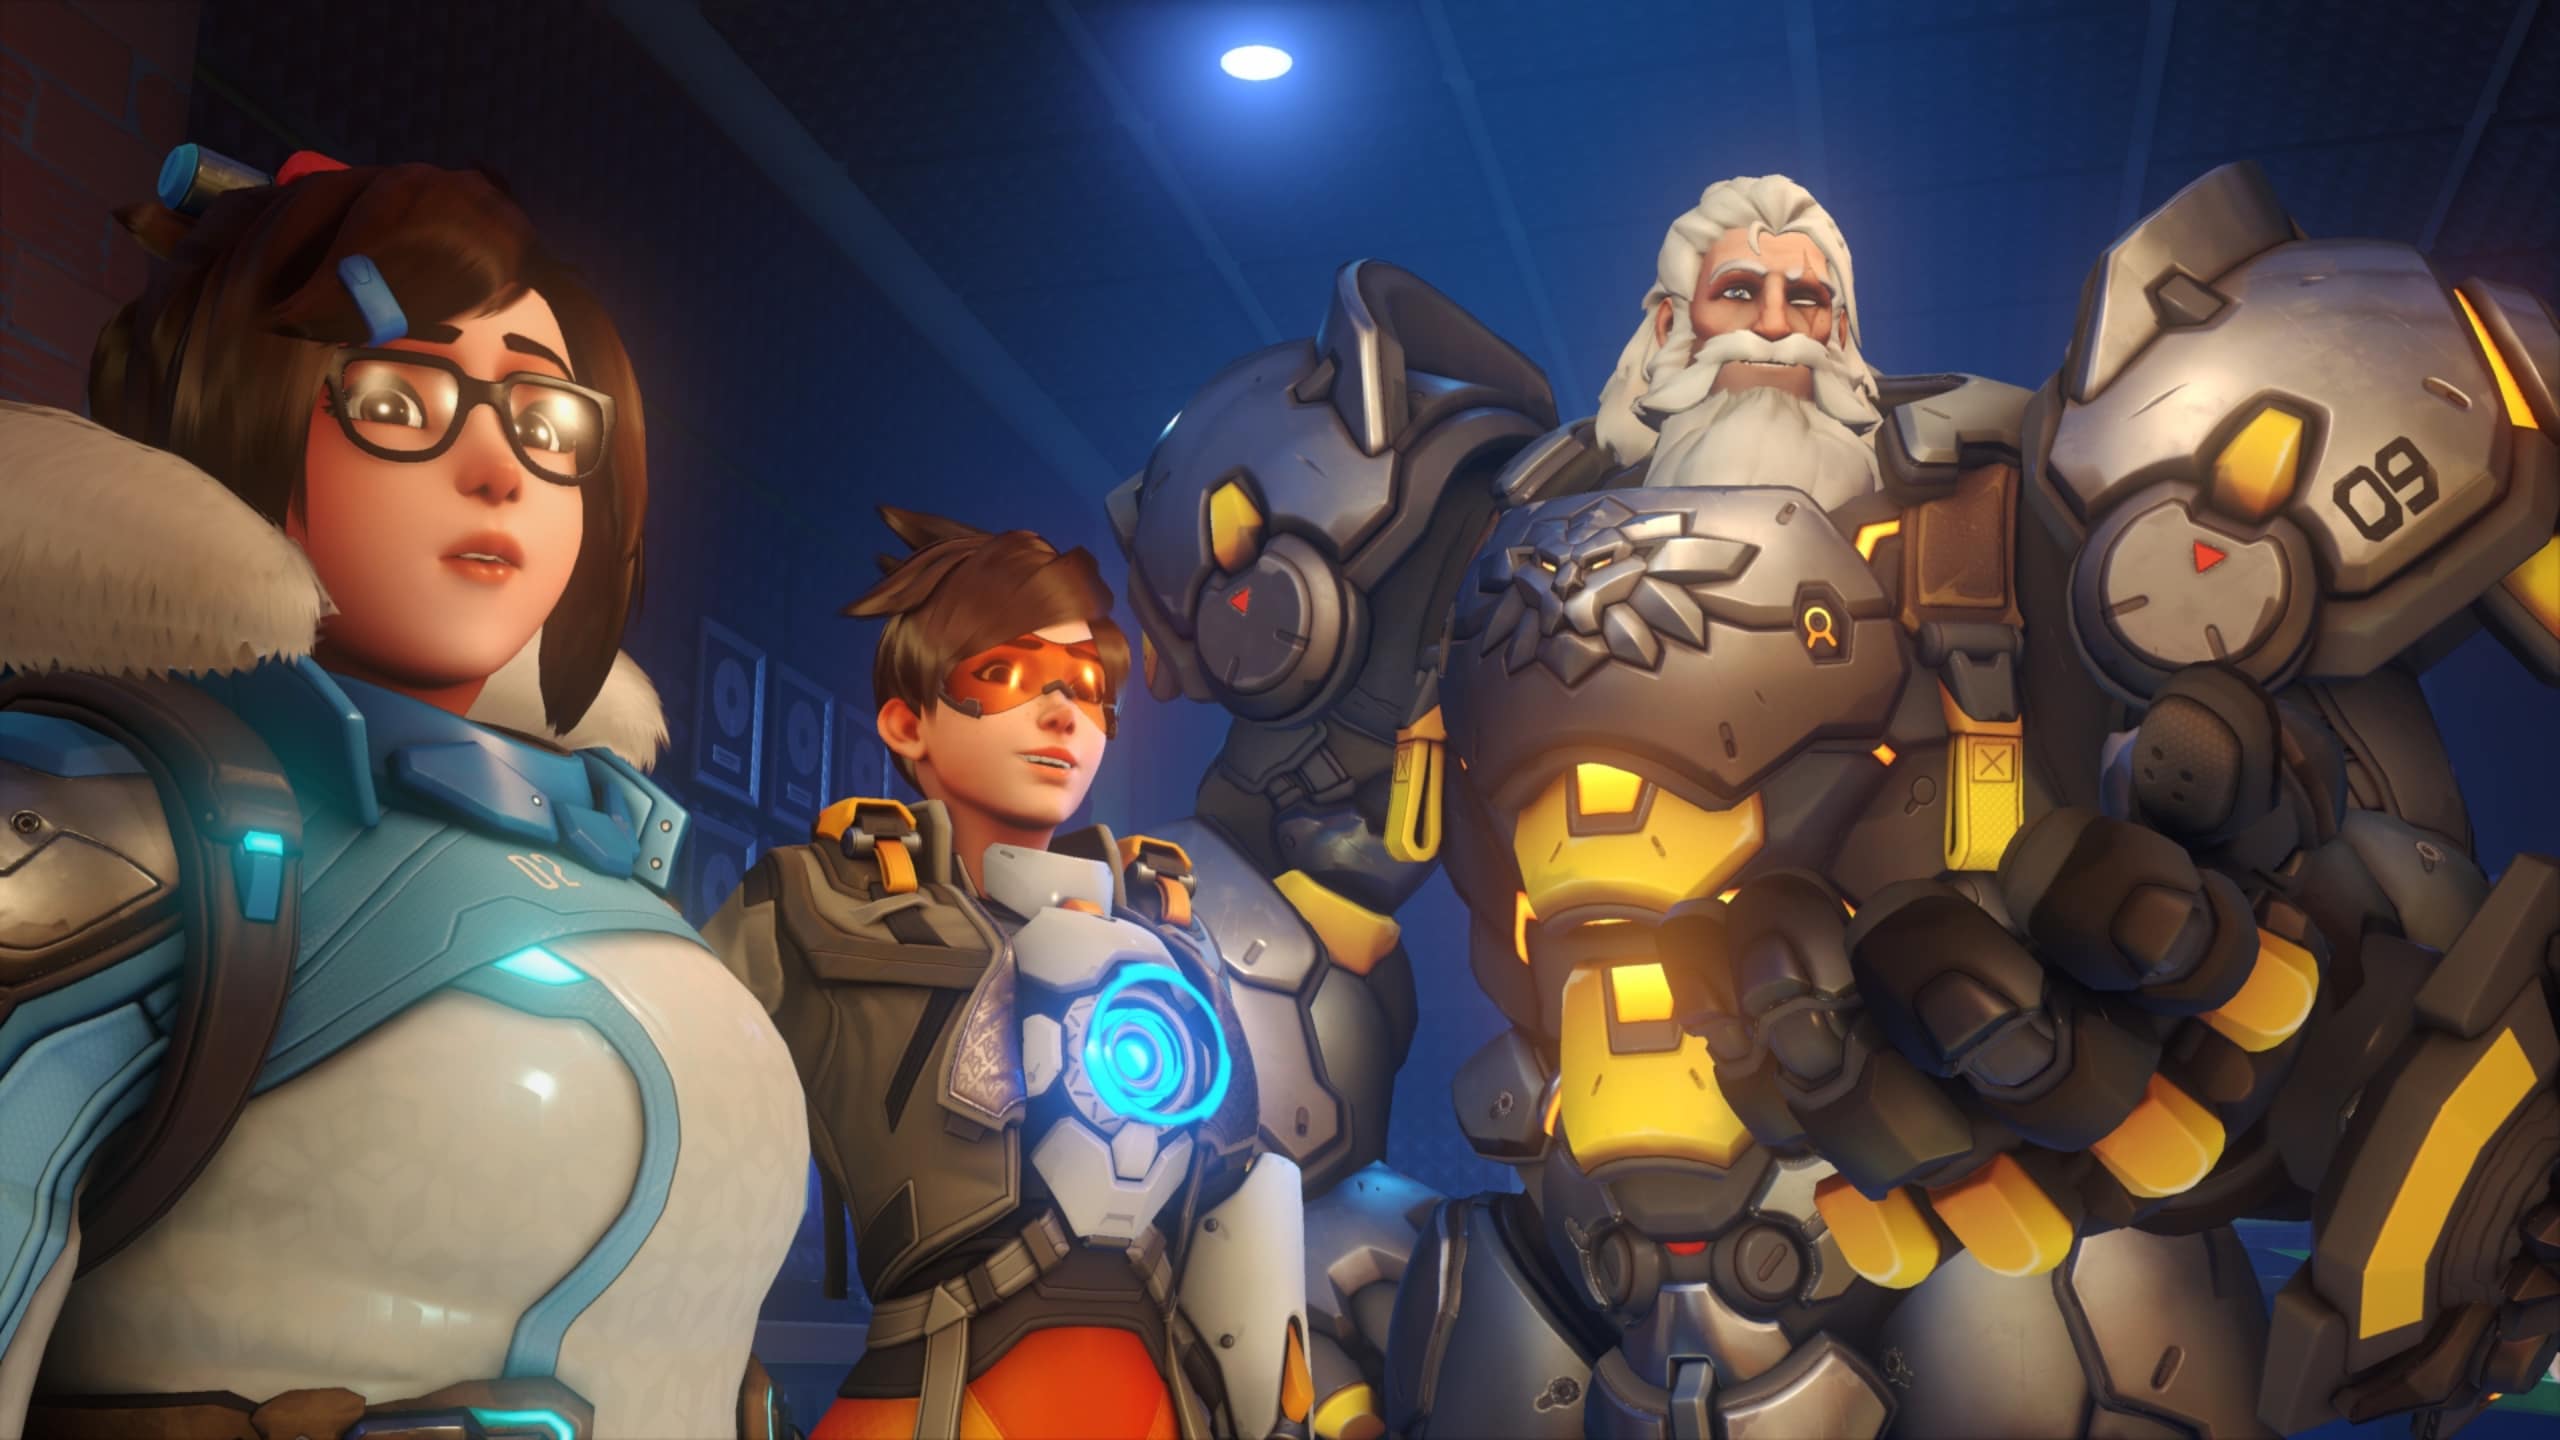 Beta Overwatch 2 - what do you need to know before testing the long-awaited production?